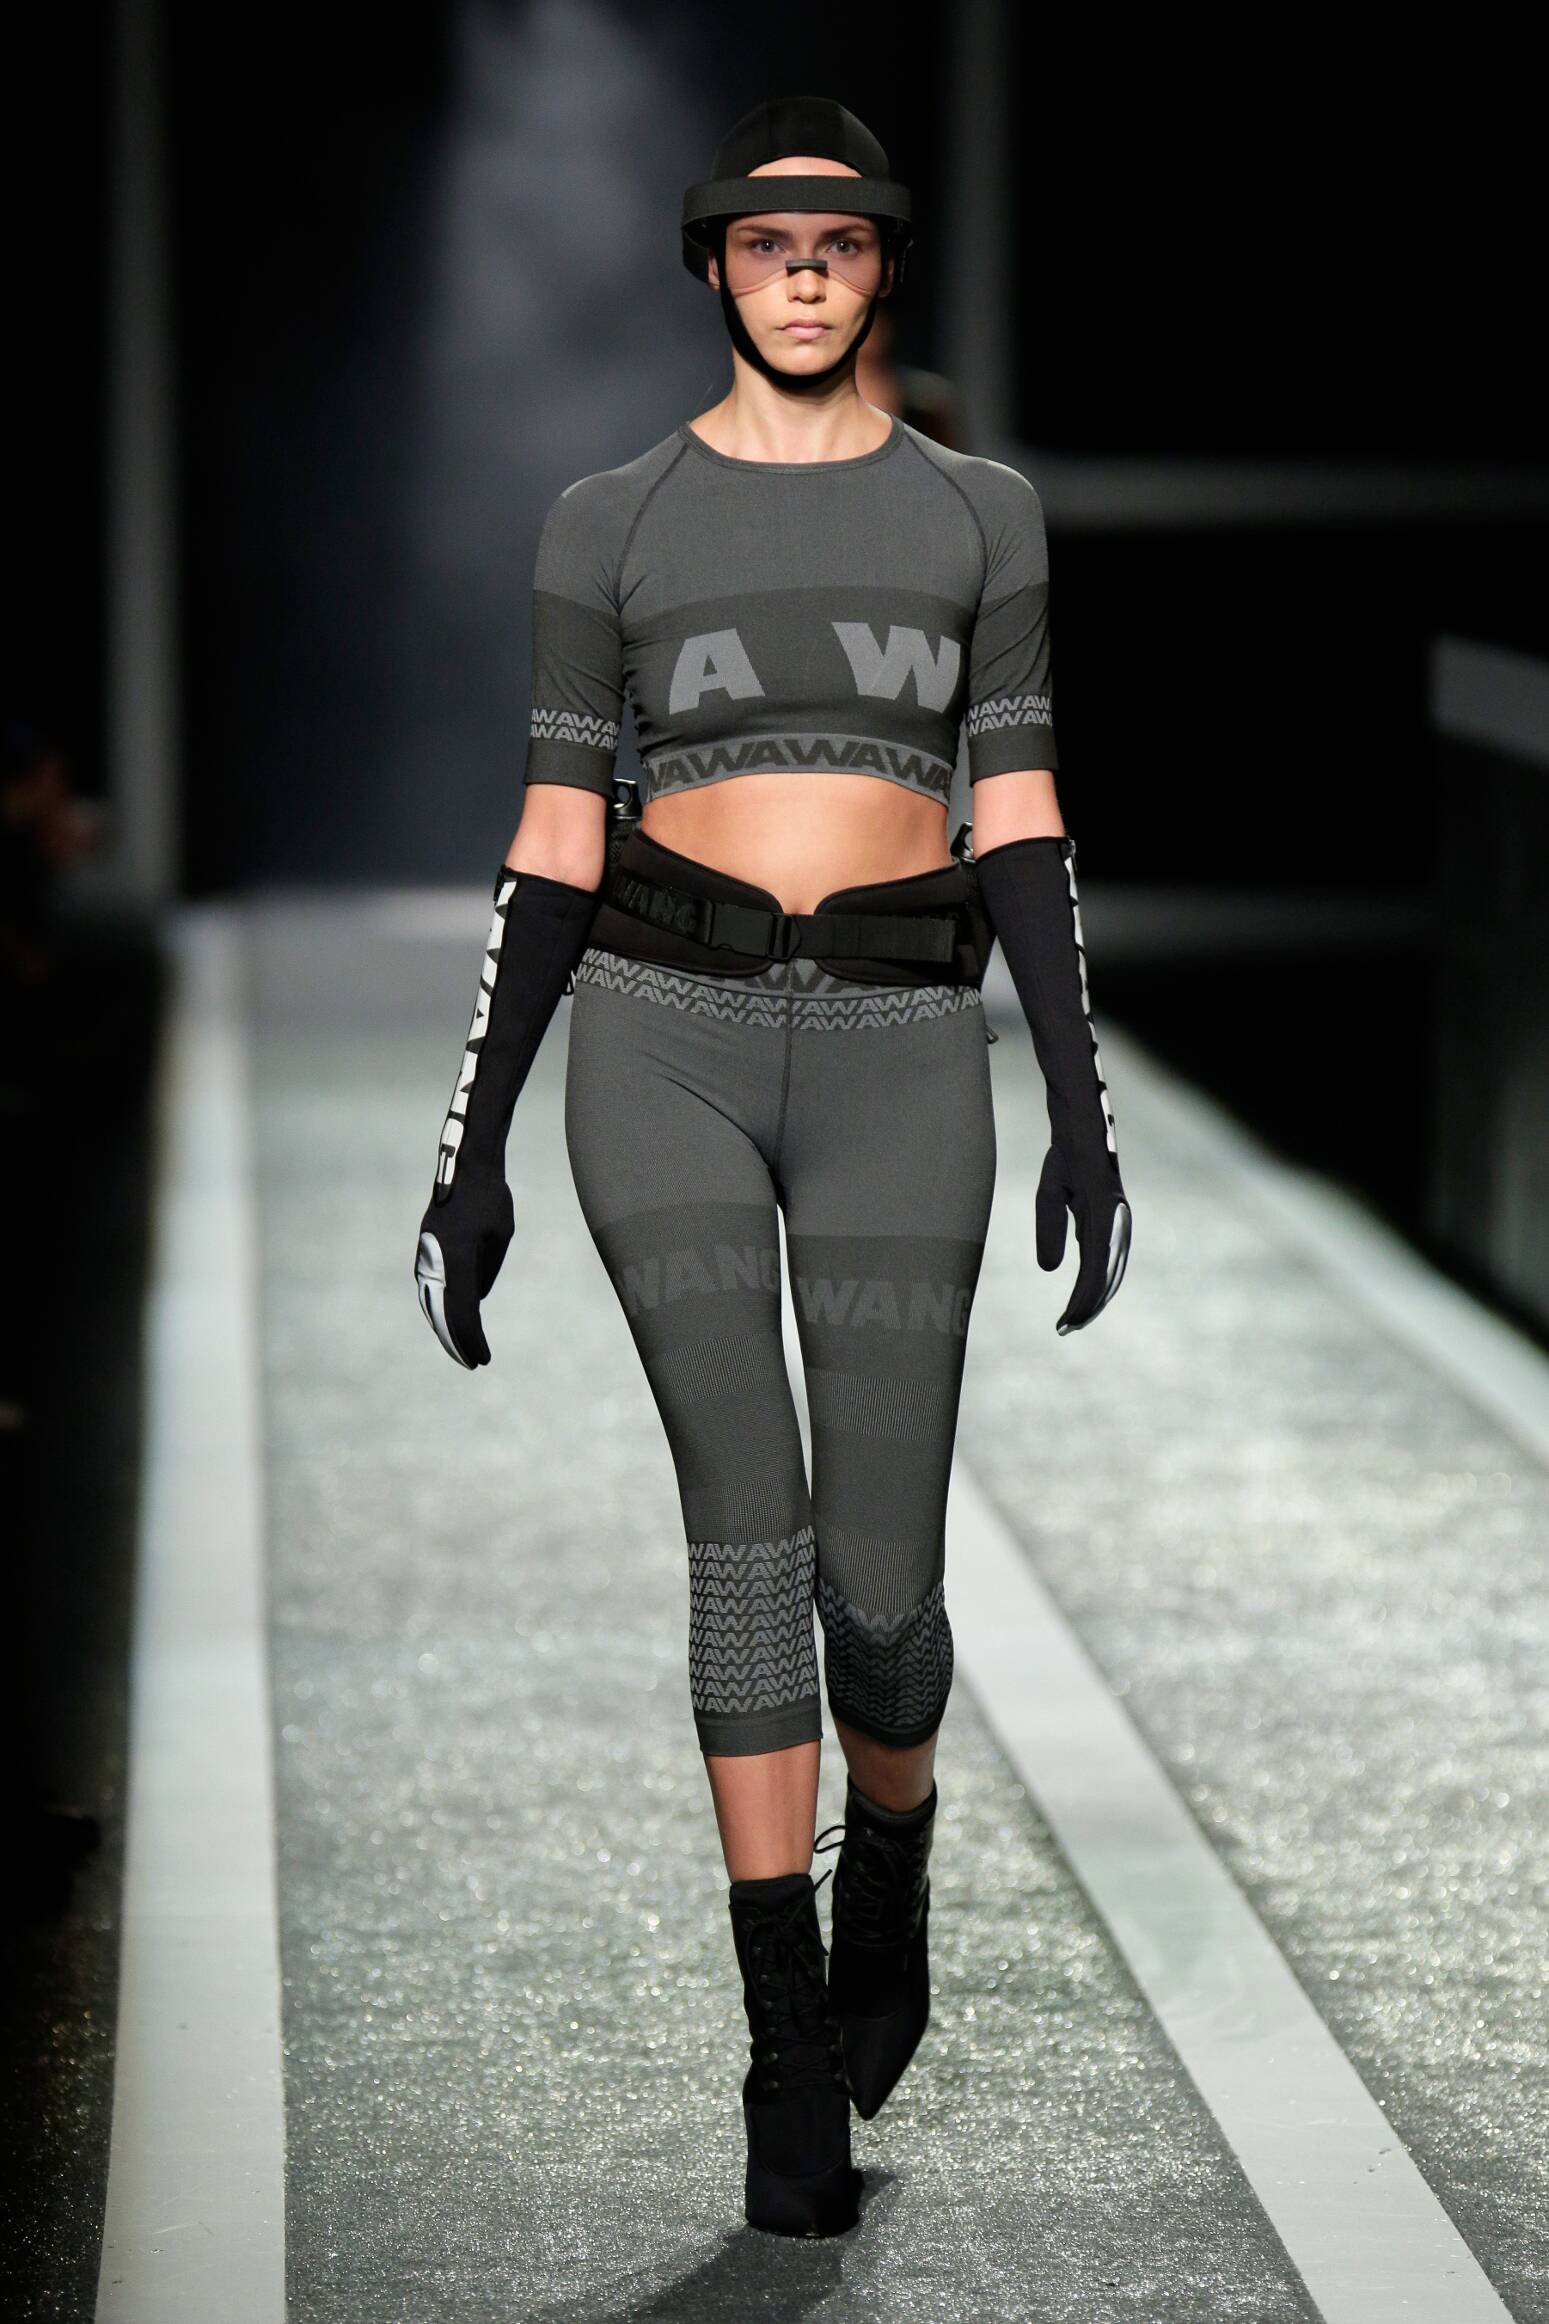 ALEXANDER WANG FOR H&M COLLECTION FASHION SHOW | The Skinny Beep